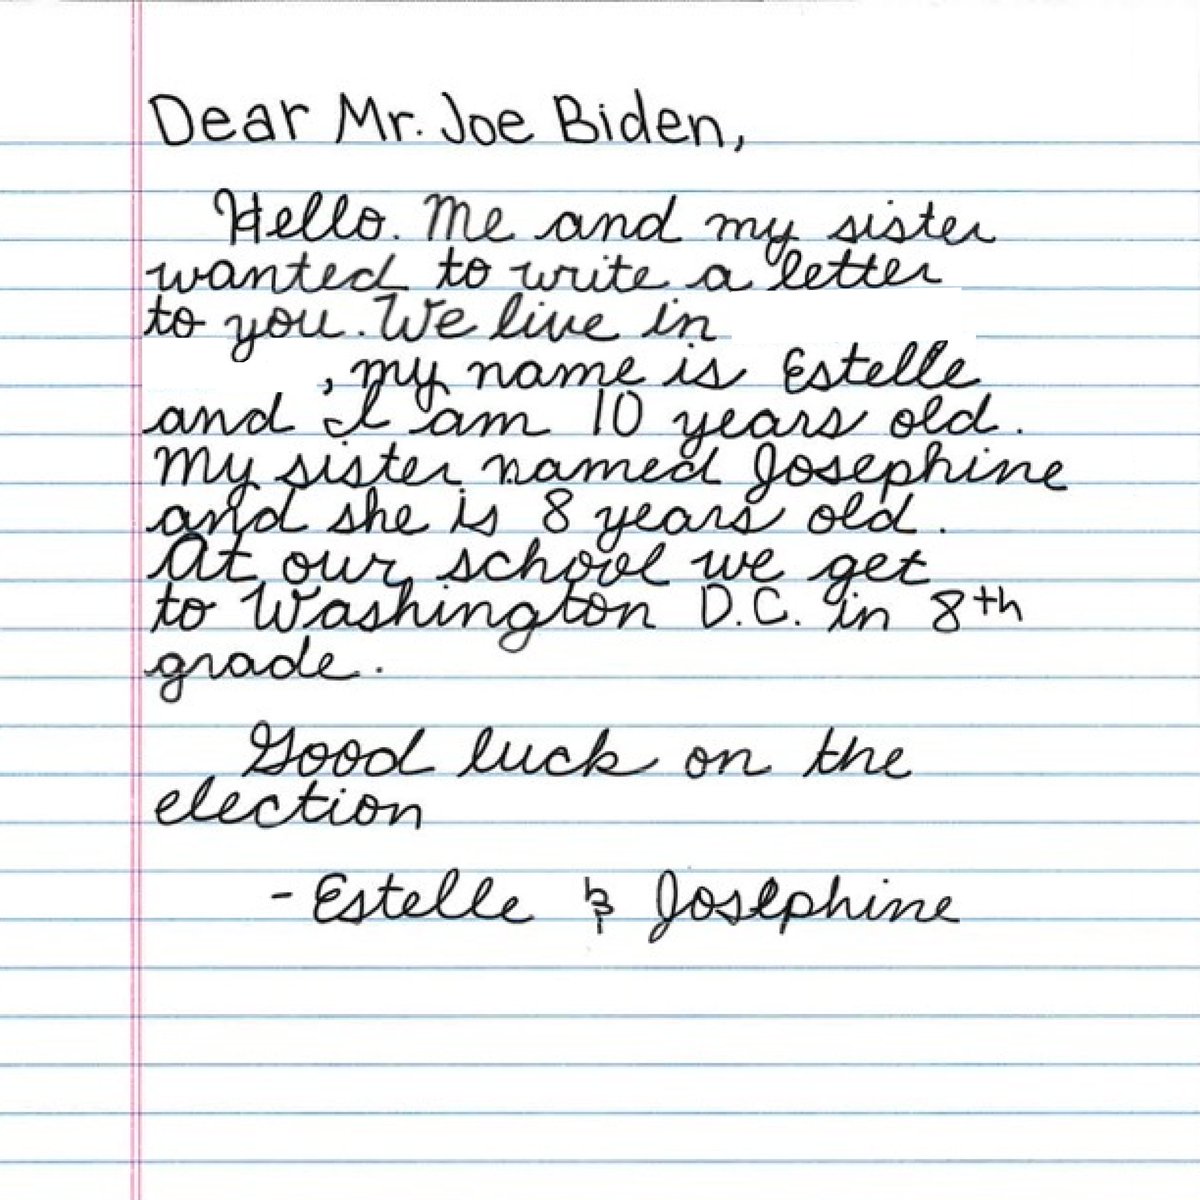 Dear Estelle and Josephine, Thank you for your kind wishes! I think you’ll love Washington, D.C. when you visit.